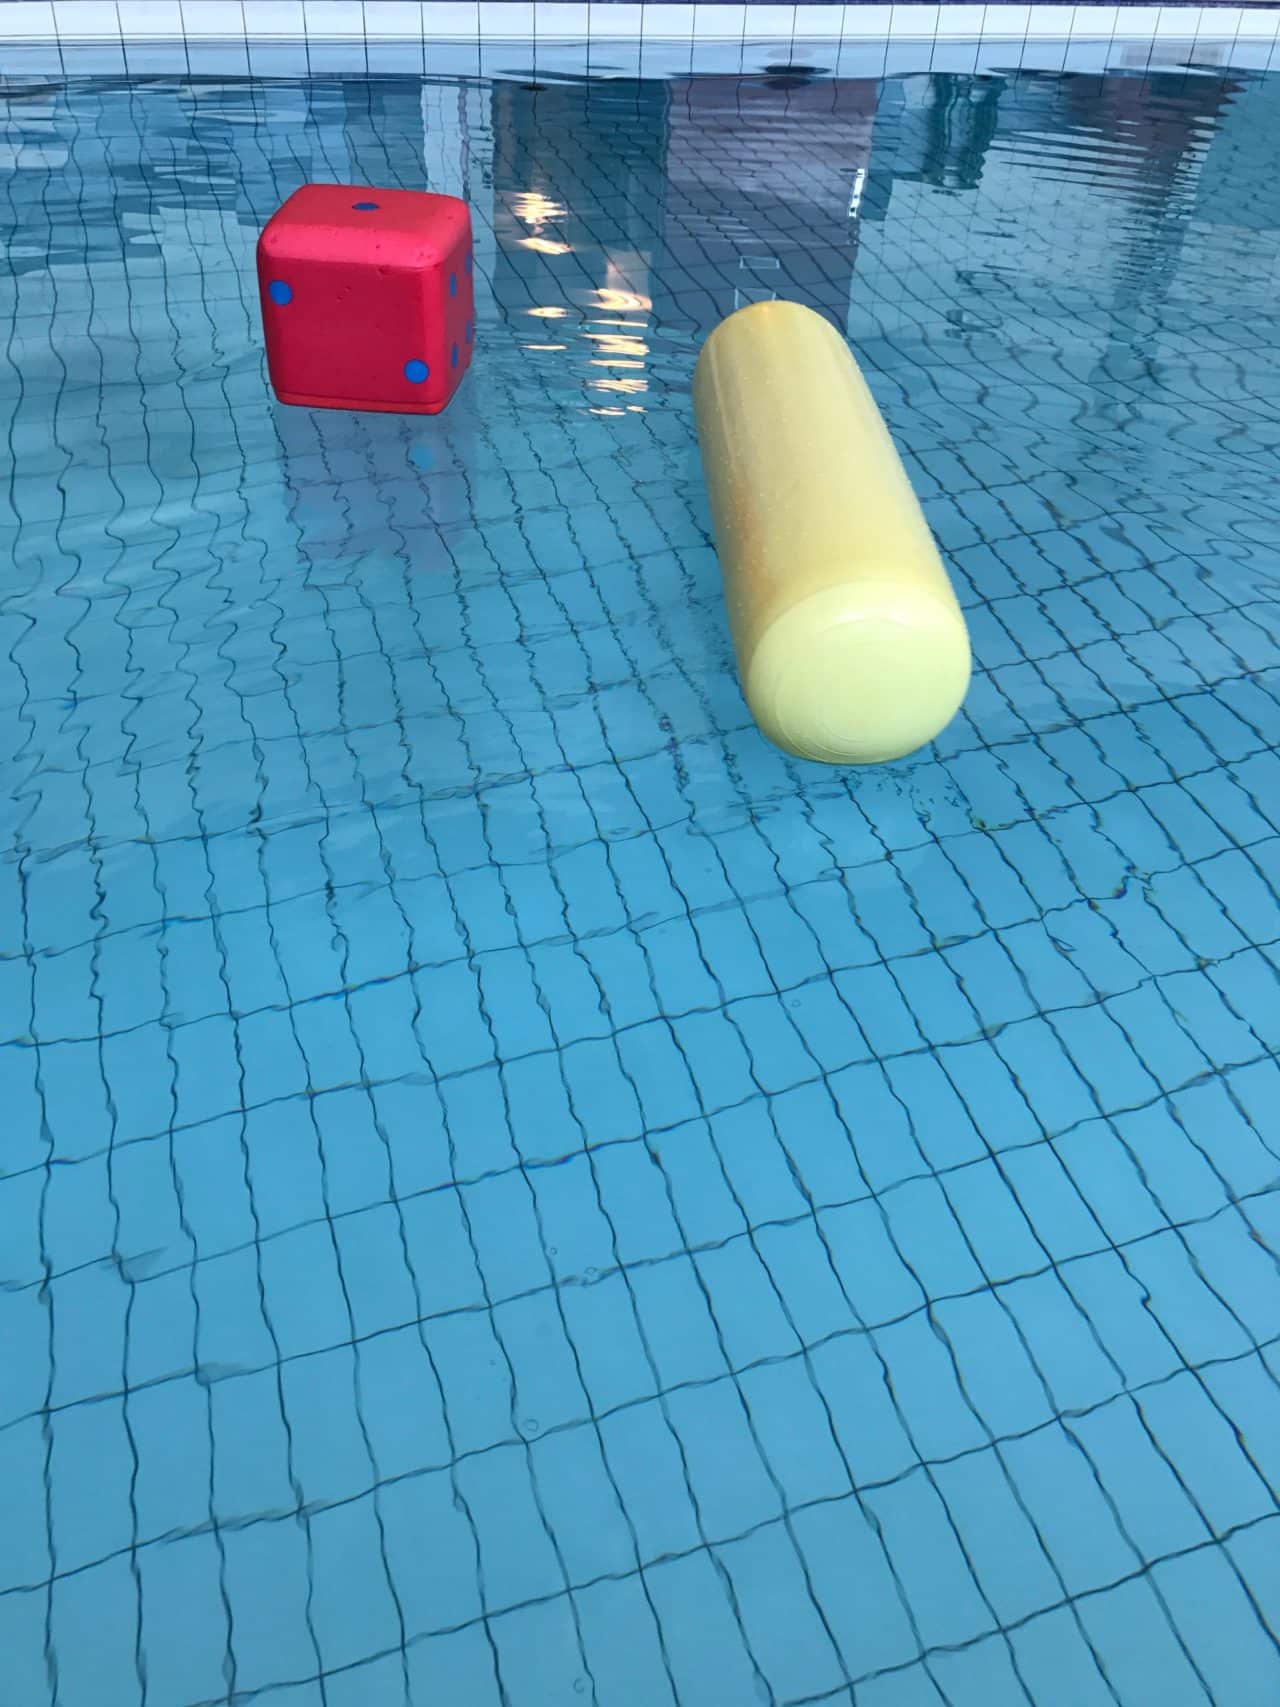 Pool Noodle And Dice In A Pool